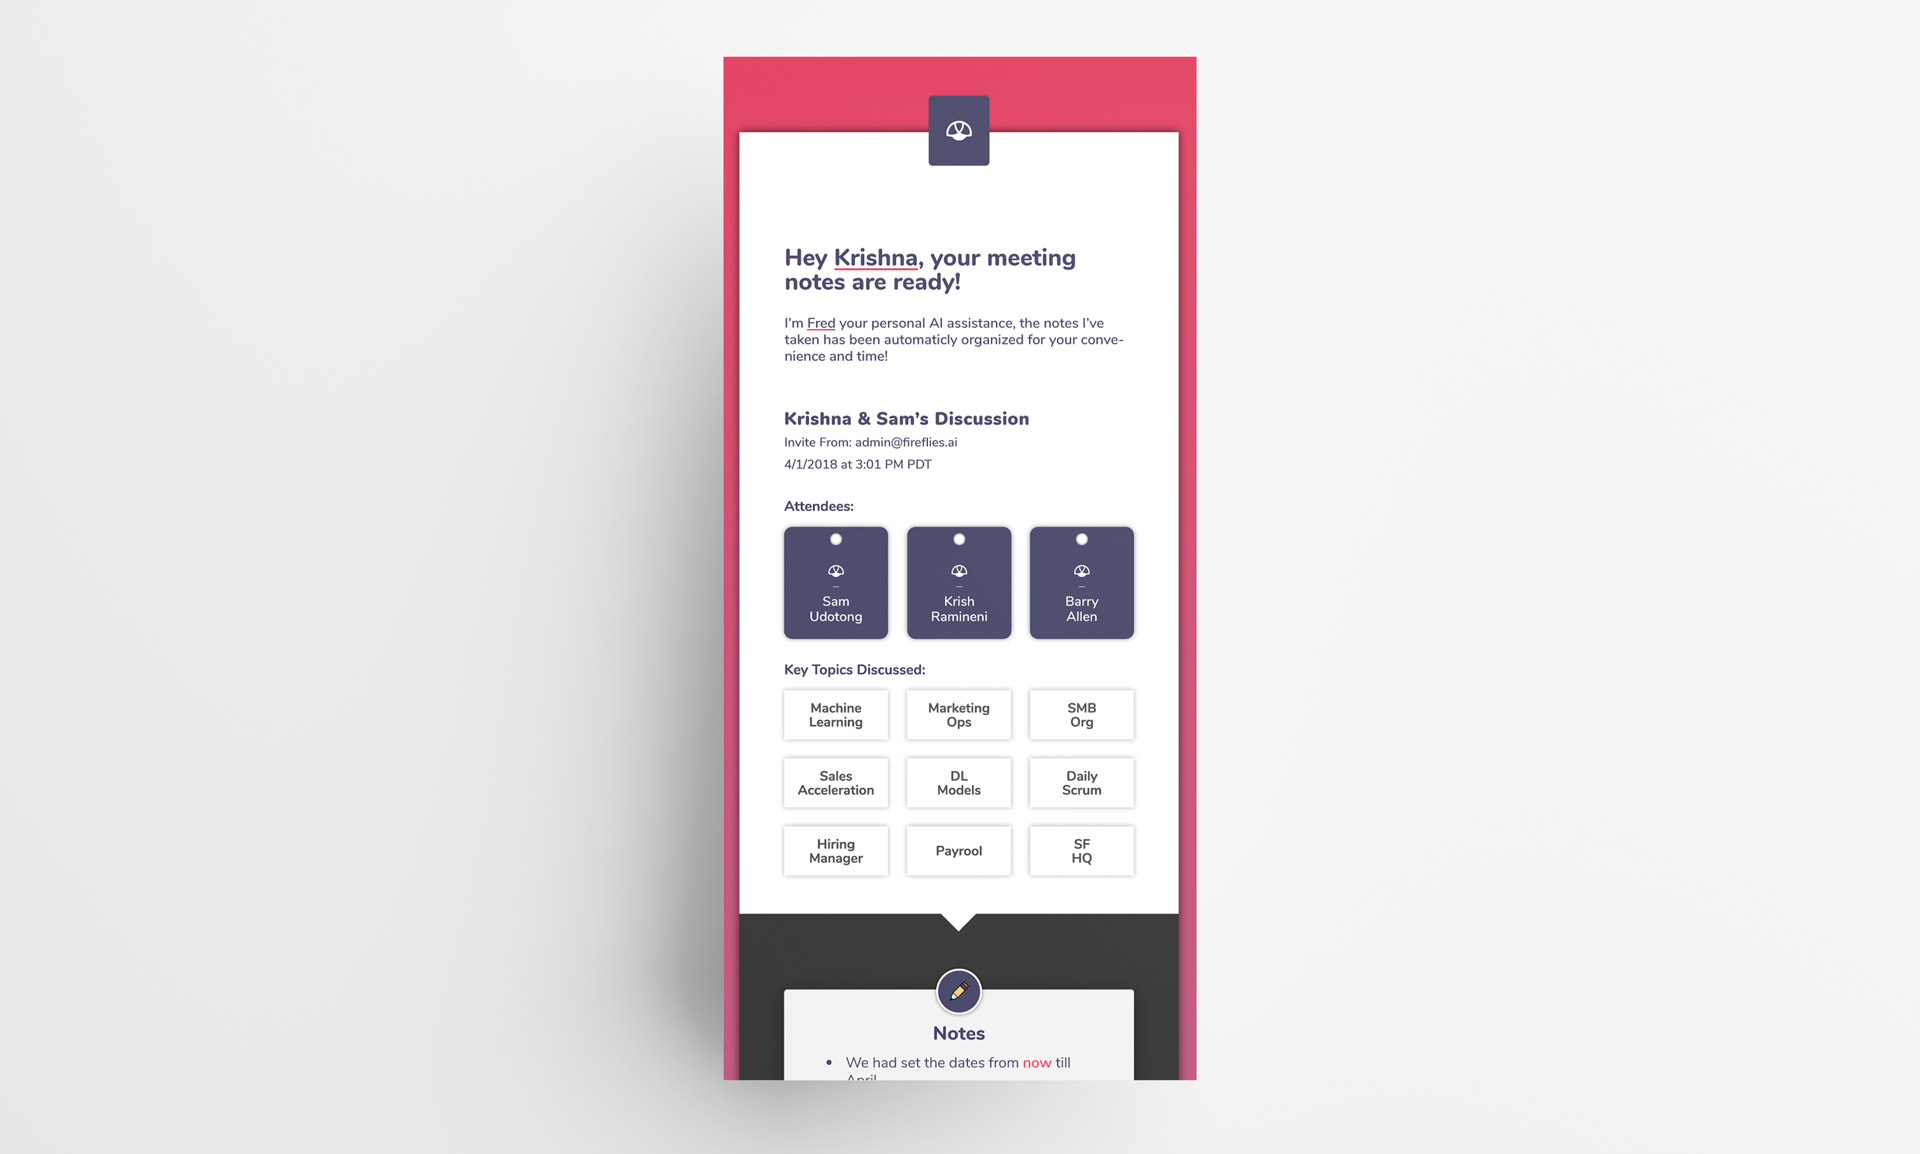 Mobile Email Designed by Raymond Shen for Fireflies.ai 2018